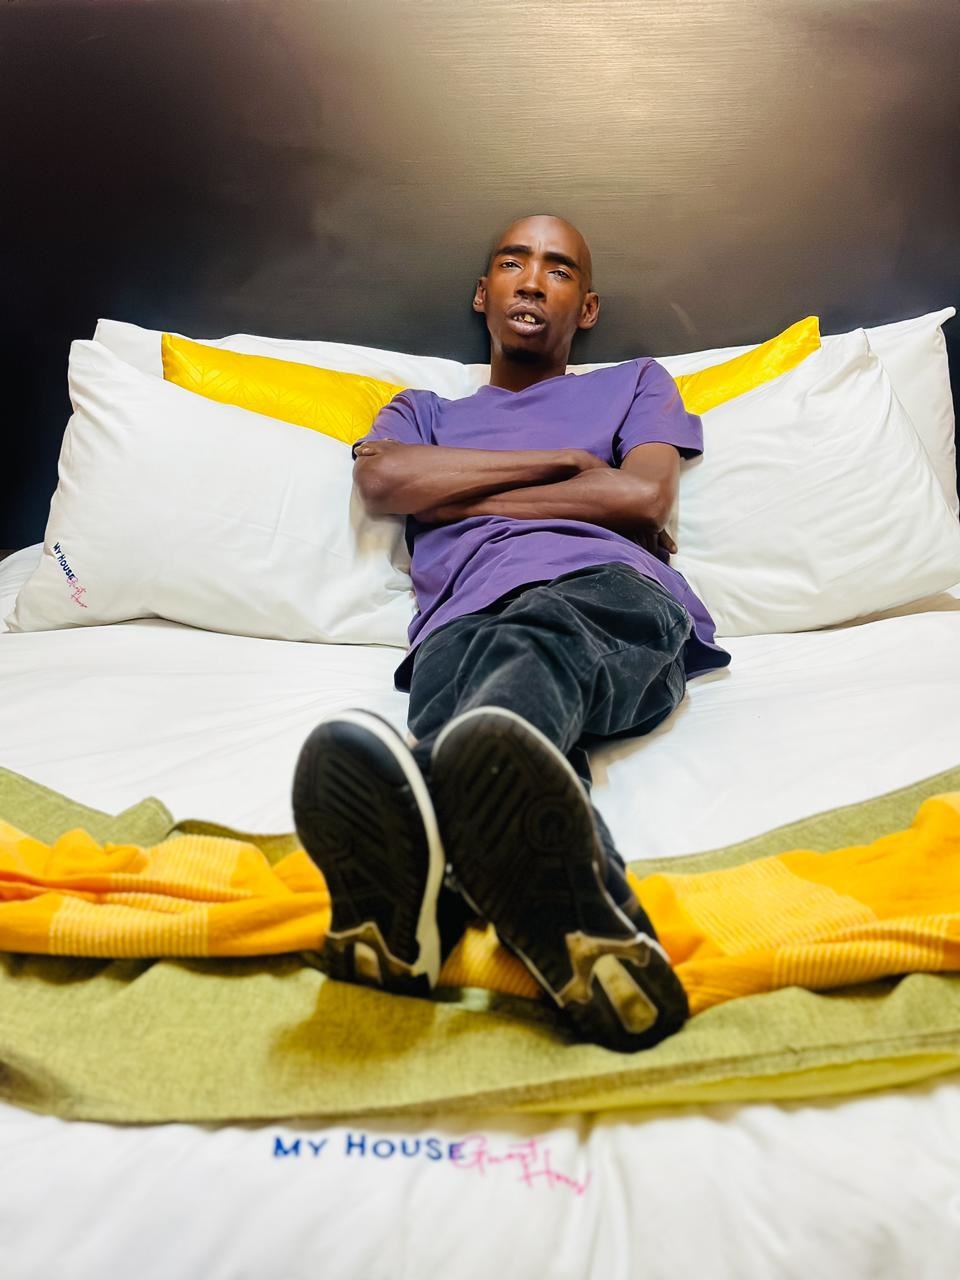 Nyaope addict Mohau Louis, popularly known as Alostro, enjoyed his night at a hotel on Tuesday evening.